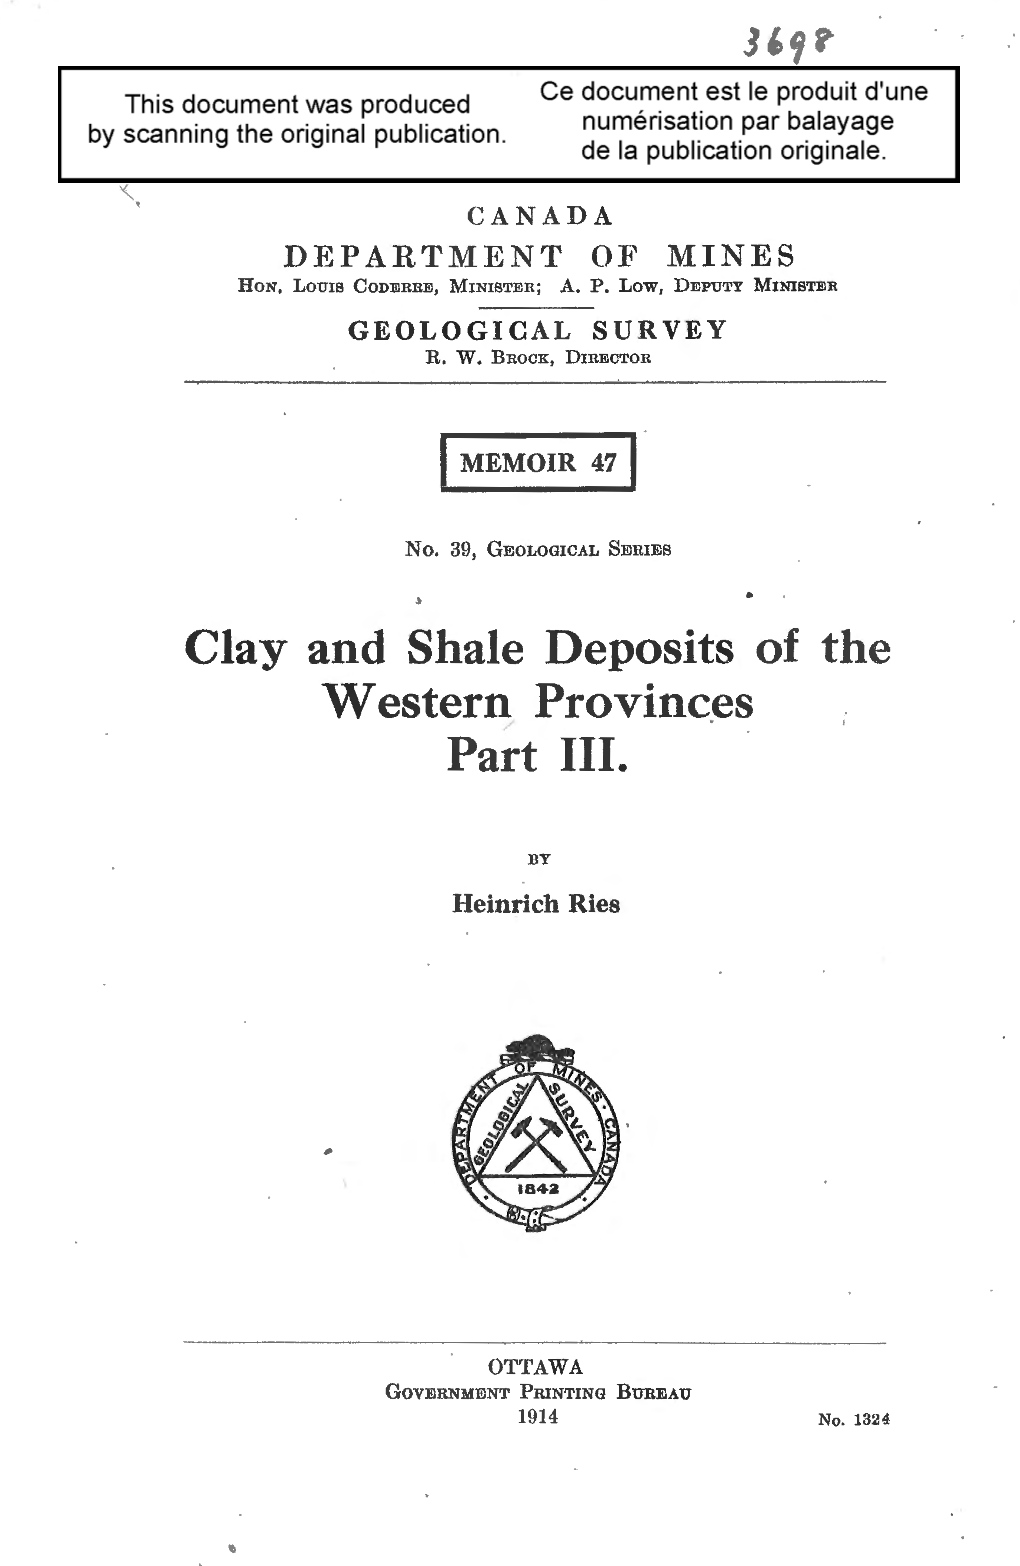 Clay and Shale Deposits of the Western Provinc.Es Part Ill